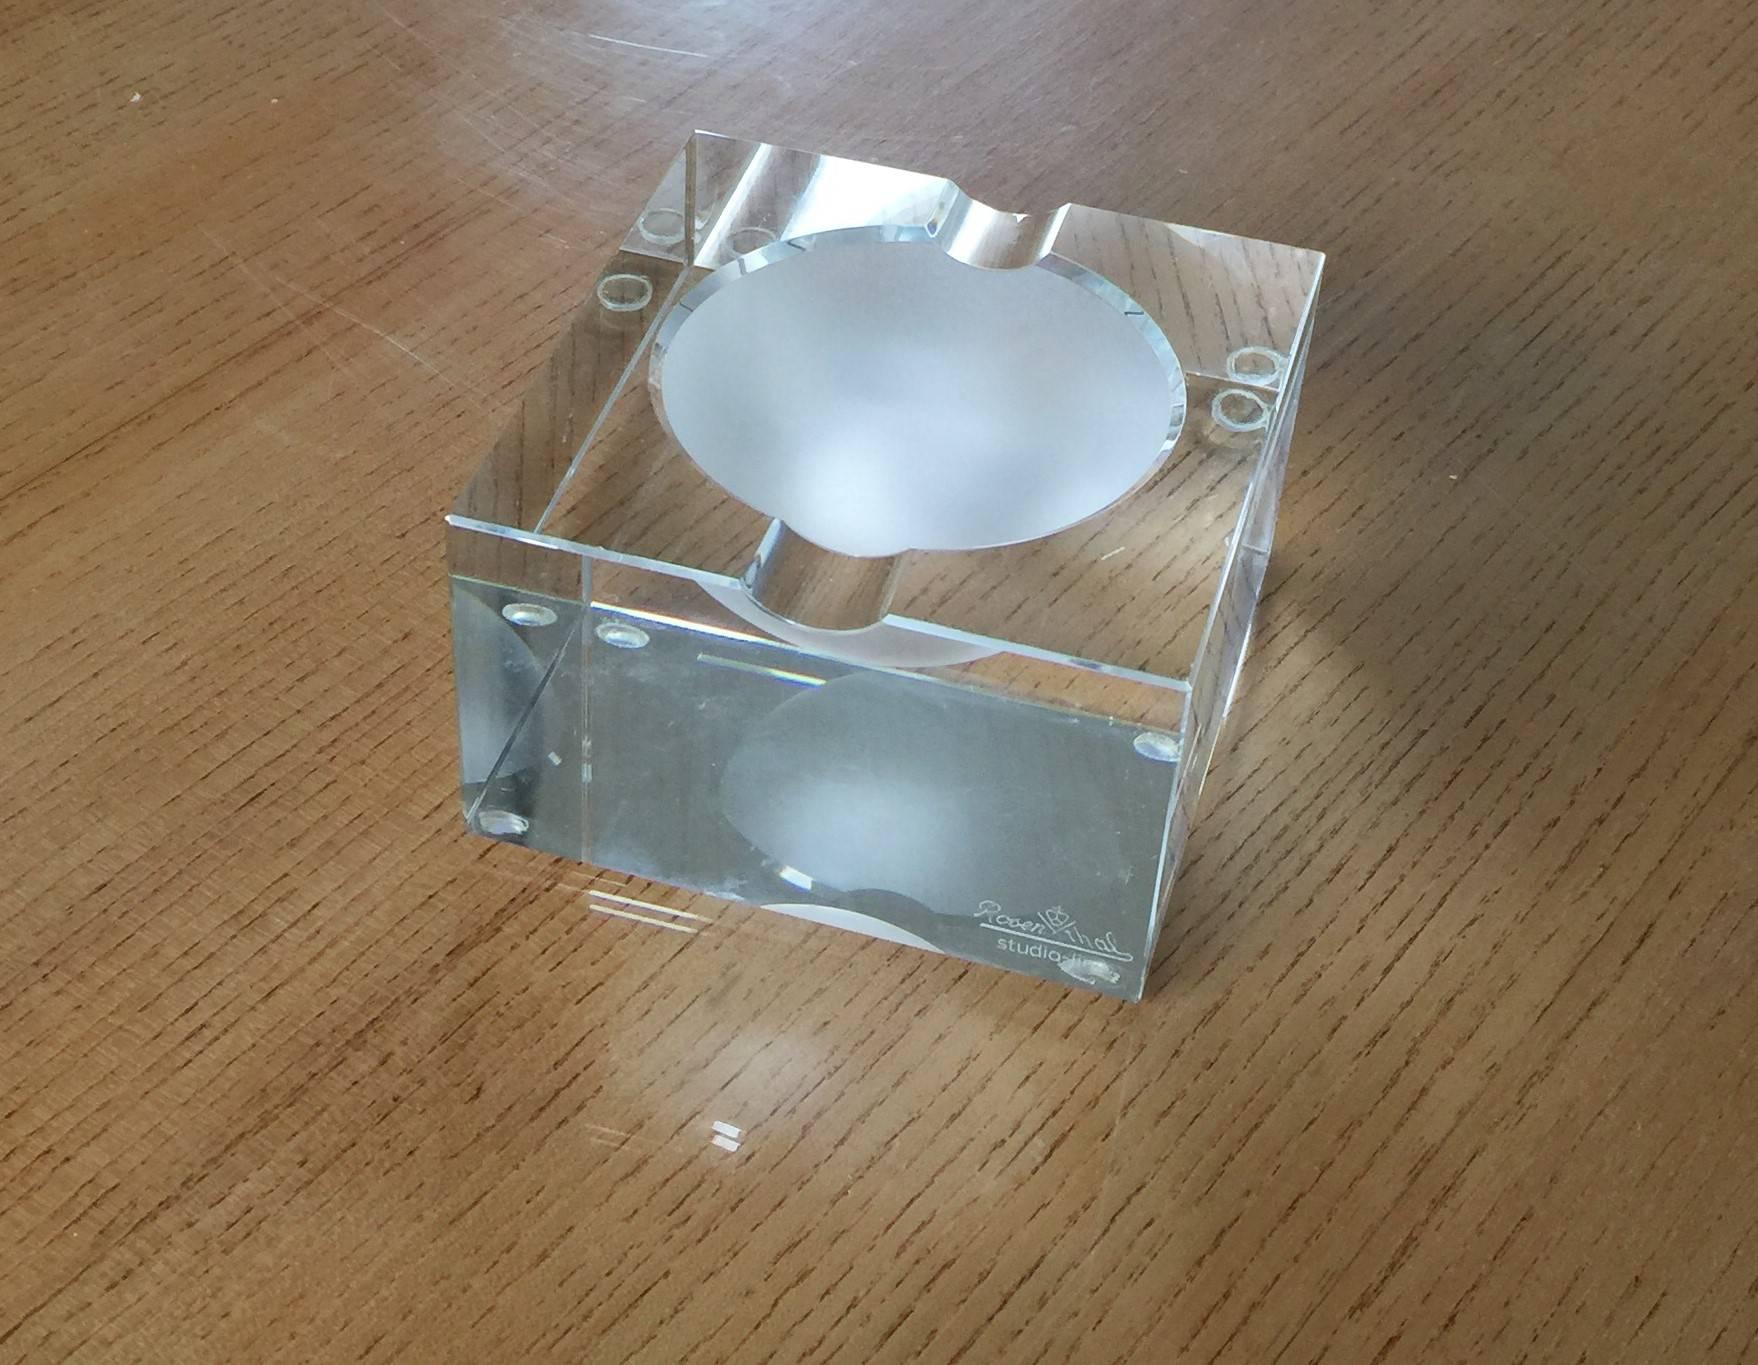 Square crystal ashtray by Rosenthal, Studio Line.
Excellent vintage condition.
This item will ship from France.
Price does not include handling, shipping and possible customs related charges.